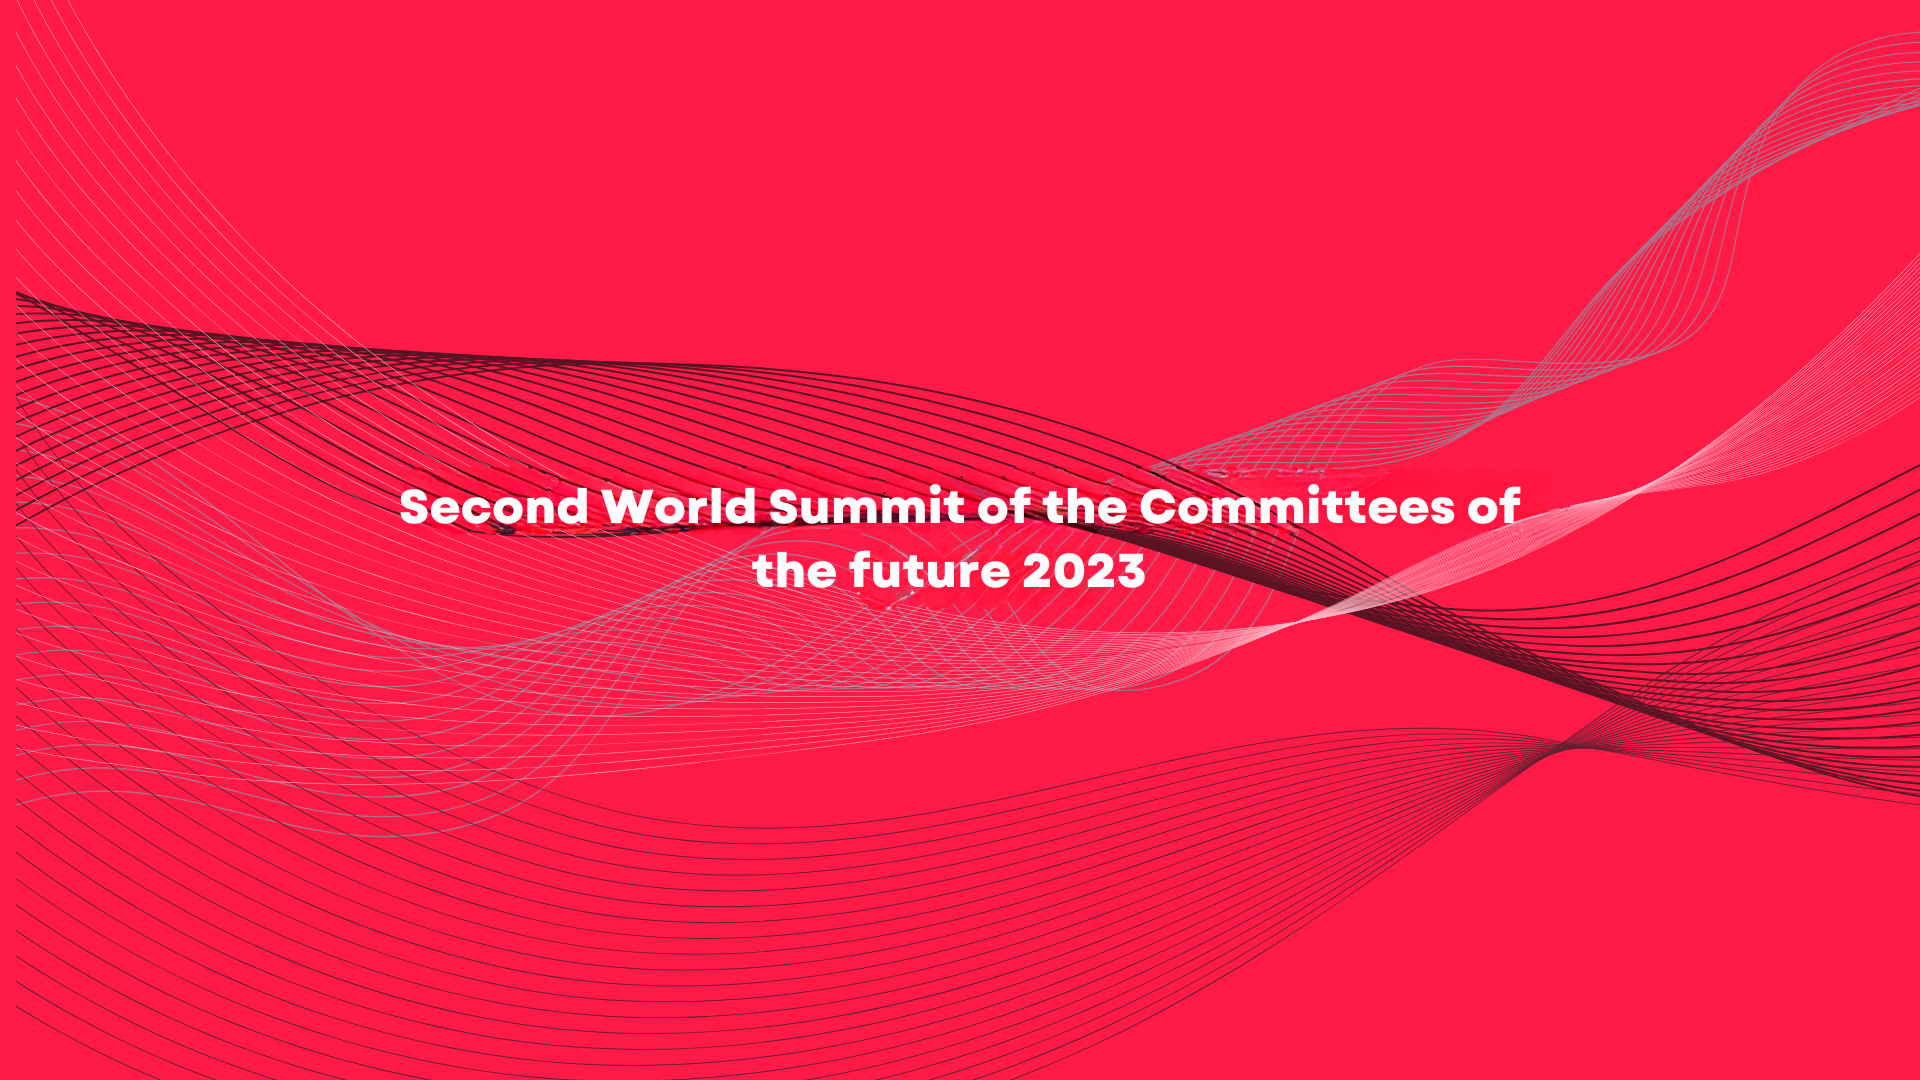 Second World Summit of the Committees of the future 2023